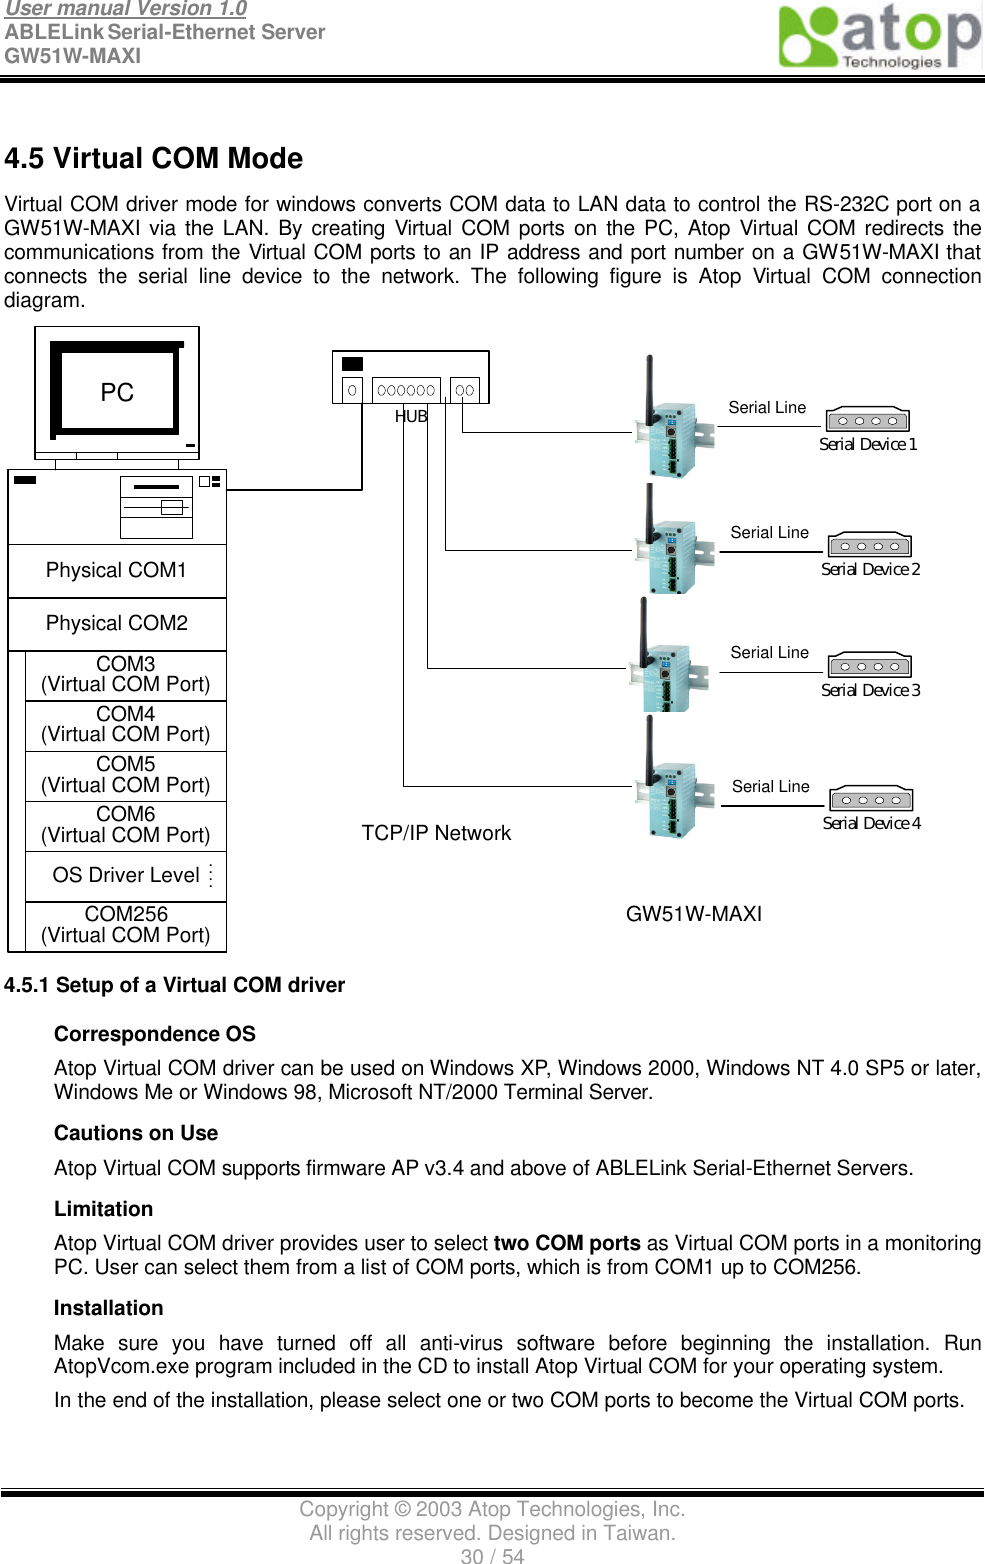 User manual Version 1.0 ABLELink Serial-Ethernet Server   GW51W-MAXI                                                                 Copyright © 2003 Atop Technologies, Inc. All rights reserved. Designed in Taiwan. 30 / 54   4.5 Virtual COM Mode Virtual COM driver mode for windows converts COM data to LAN data to control the RS-232C port on a GW51W-MAXI via the LAN. By creating Virtual COM ports on the PC, Atop Virtual COM redirects the communications from the Virtual COM ports to an IP address and port number on a GW51W-MAXI that connects the serial line device to the network. The following figure is Atop Virtual  COM connection diagram. Physical COM1Physical COM2COM3(Virtual COM Port)COM4(Virtual COM Port)COM5(Virtual COM Port)COM6(Virtual COM Port)OS Driver LevelCOM256(Virtual COM Port)PC::HUBTCP/IP NetworkSerial LineSerial Device 1Serial LineSerial Device 2Serial LineSerial Device 3Serial LineSerial Device 4GW51W-MAXI 4.5.1 Setup of a Virtual COM driver Correspondence OS Atop Virtual COM driver can be used on Windows XP, Windows 2000, Windows NT 4.0 SP5 or later, Windows Me or Windows 98, Microsoft NT/2000 Terminal Server. Cautions on Use Atop Virtual COM supports firmware AP v3.4 and above of ABLELink Serial-Ethernet Servers. Limitation Atop Virtual COM driver provides user to select two COM ports as Virtual COM ports in a monitoring PC. User can select them from a list of COM ports, which is from COM1 up to COM256. Installation Make sure you have turned off all anti-virus software before beginning the installation. Run AtopVcom.exe program included in the CD to install Atop Virtual COM for your operating system. In the end of the installation, please select one or two COM ports to become the Virtual COM ports. 